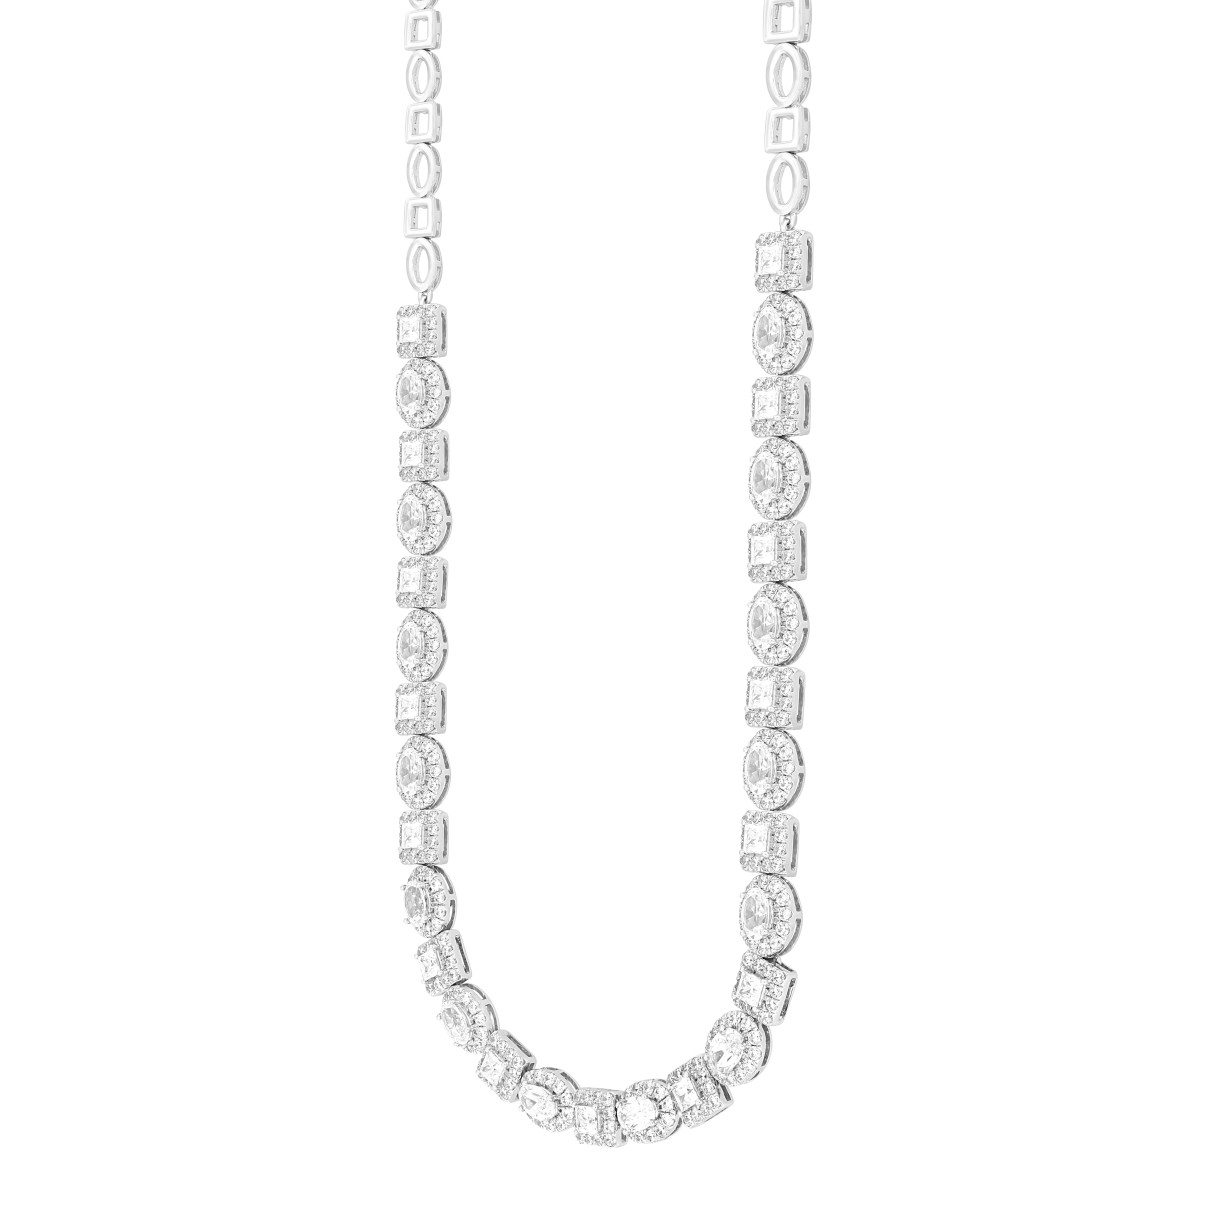 LADIES NECKLACE 14CT ROUND/PEAR/OVAL DIAMOND 14K WHITE GOLD